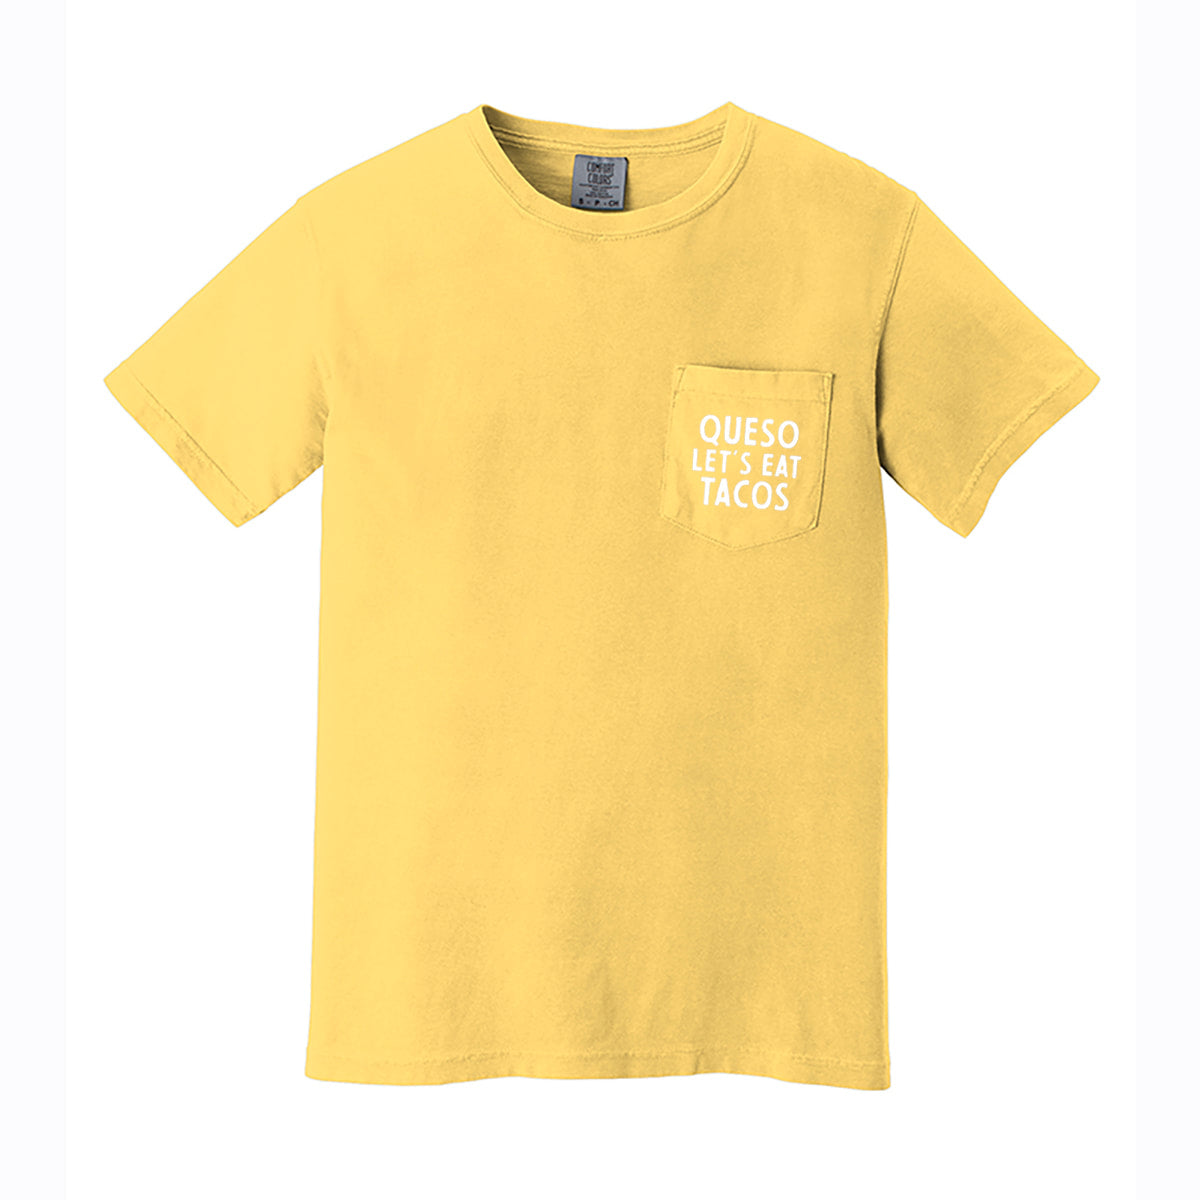 Queso Let's Eat Tacos Pocket Tee